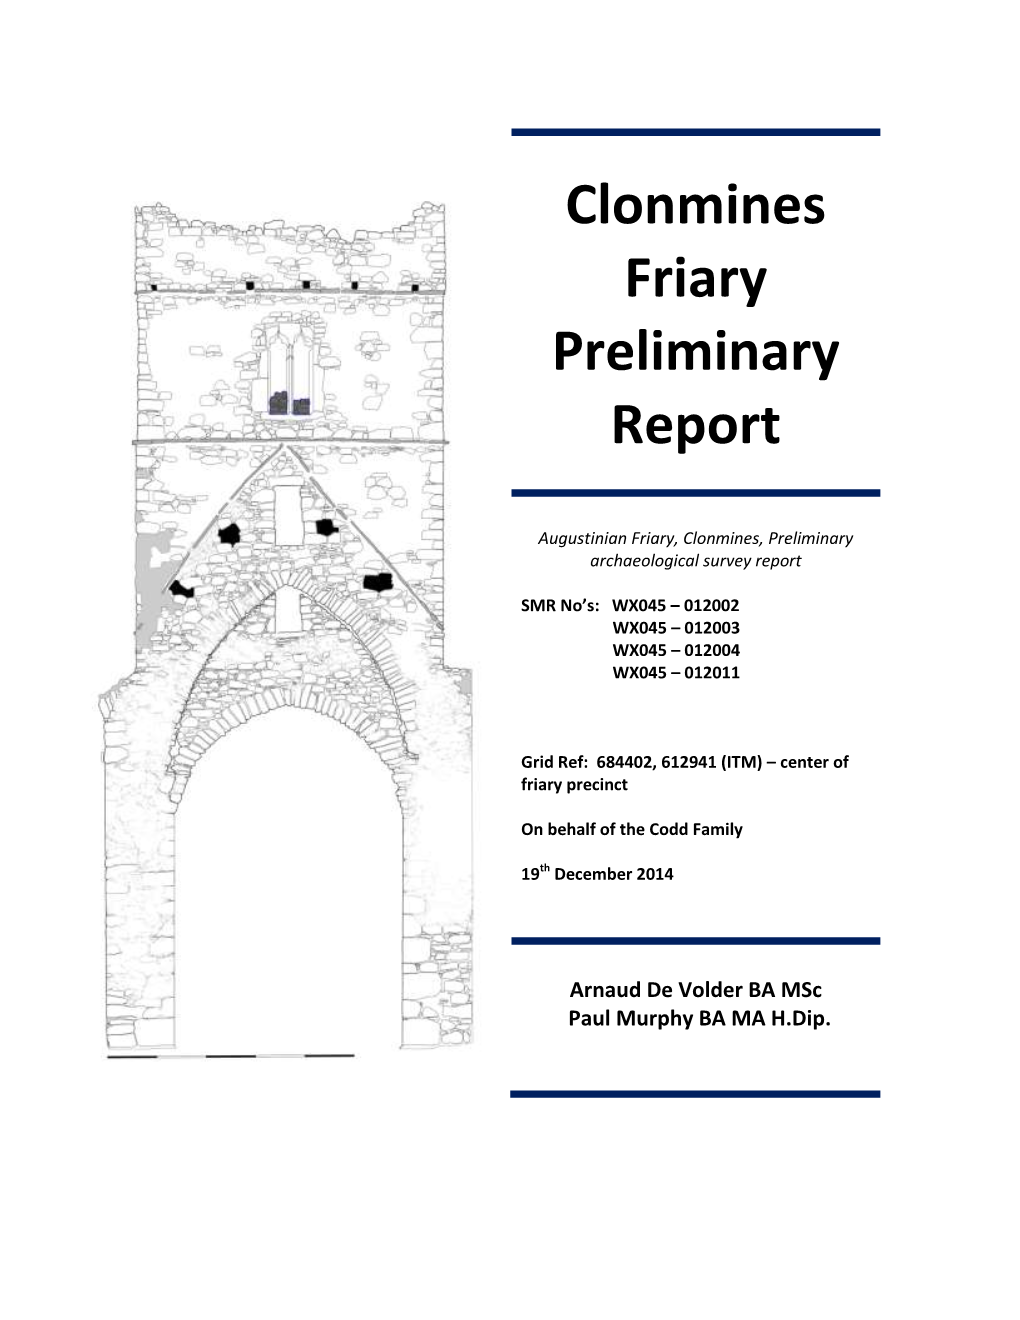 Clonmines Friary Preliminary Report